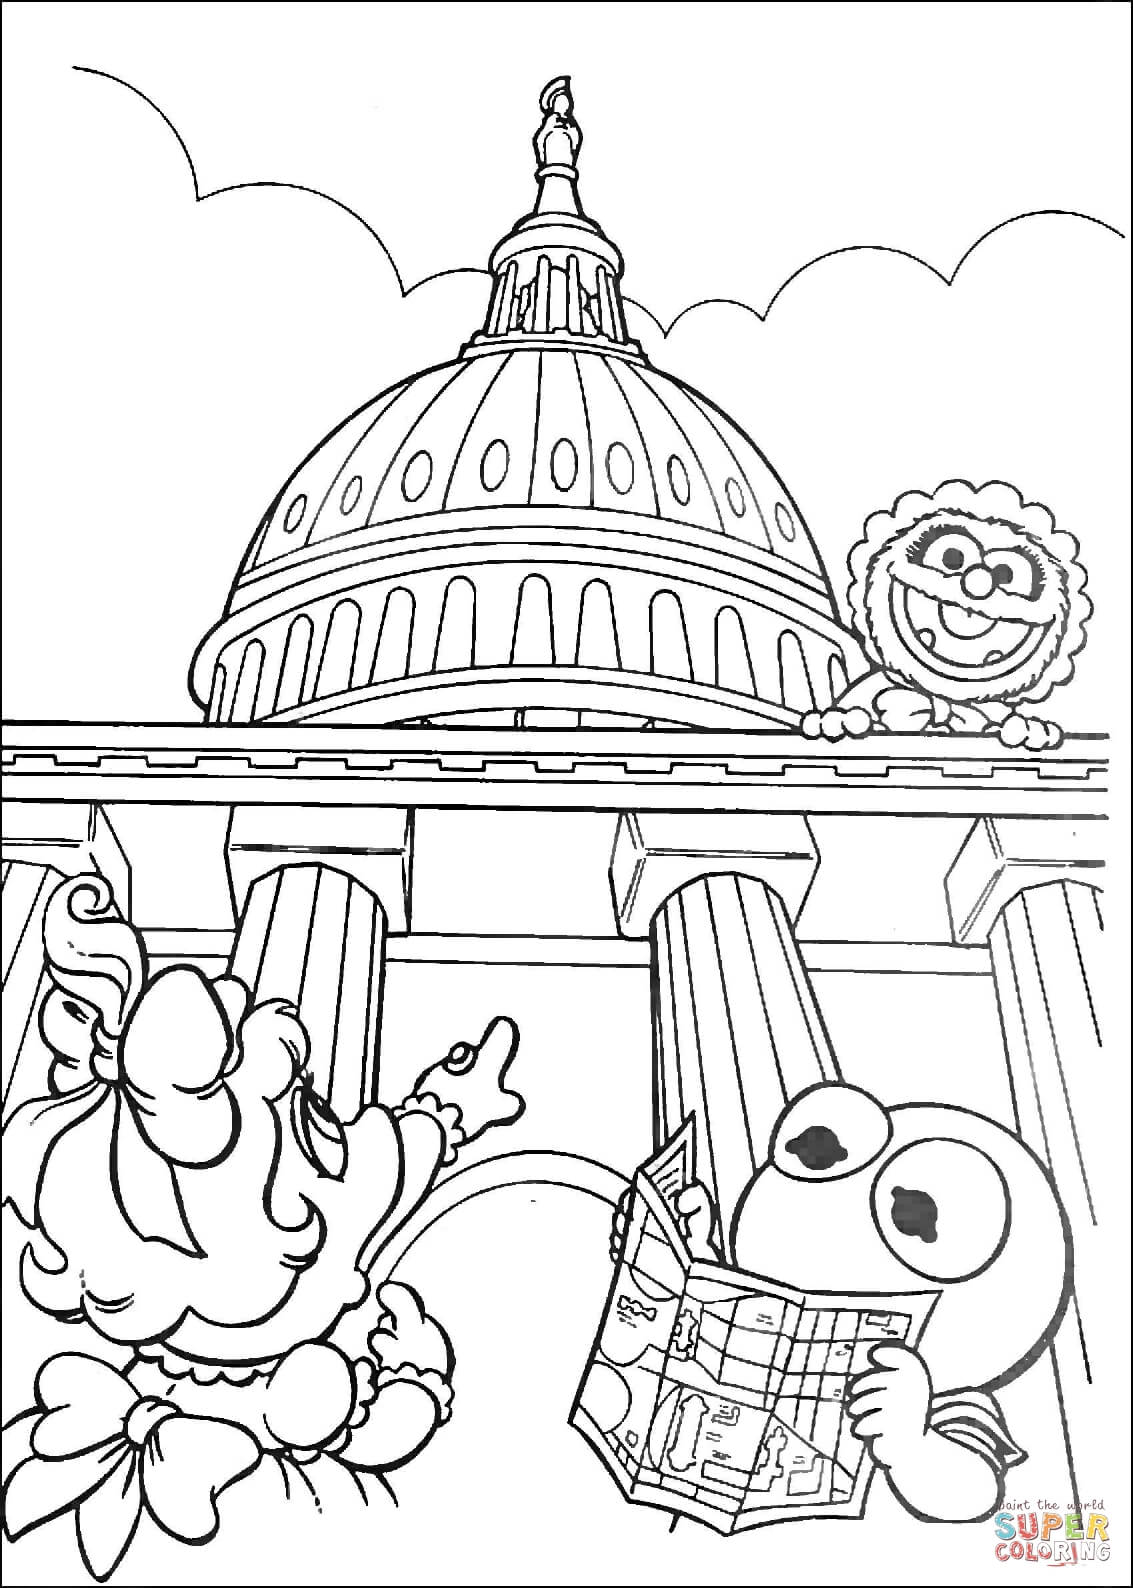 Celebrate Freedom with 4th of July: 180+ Free Coloring Pages 78